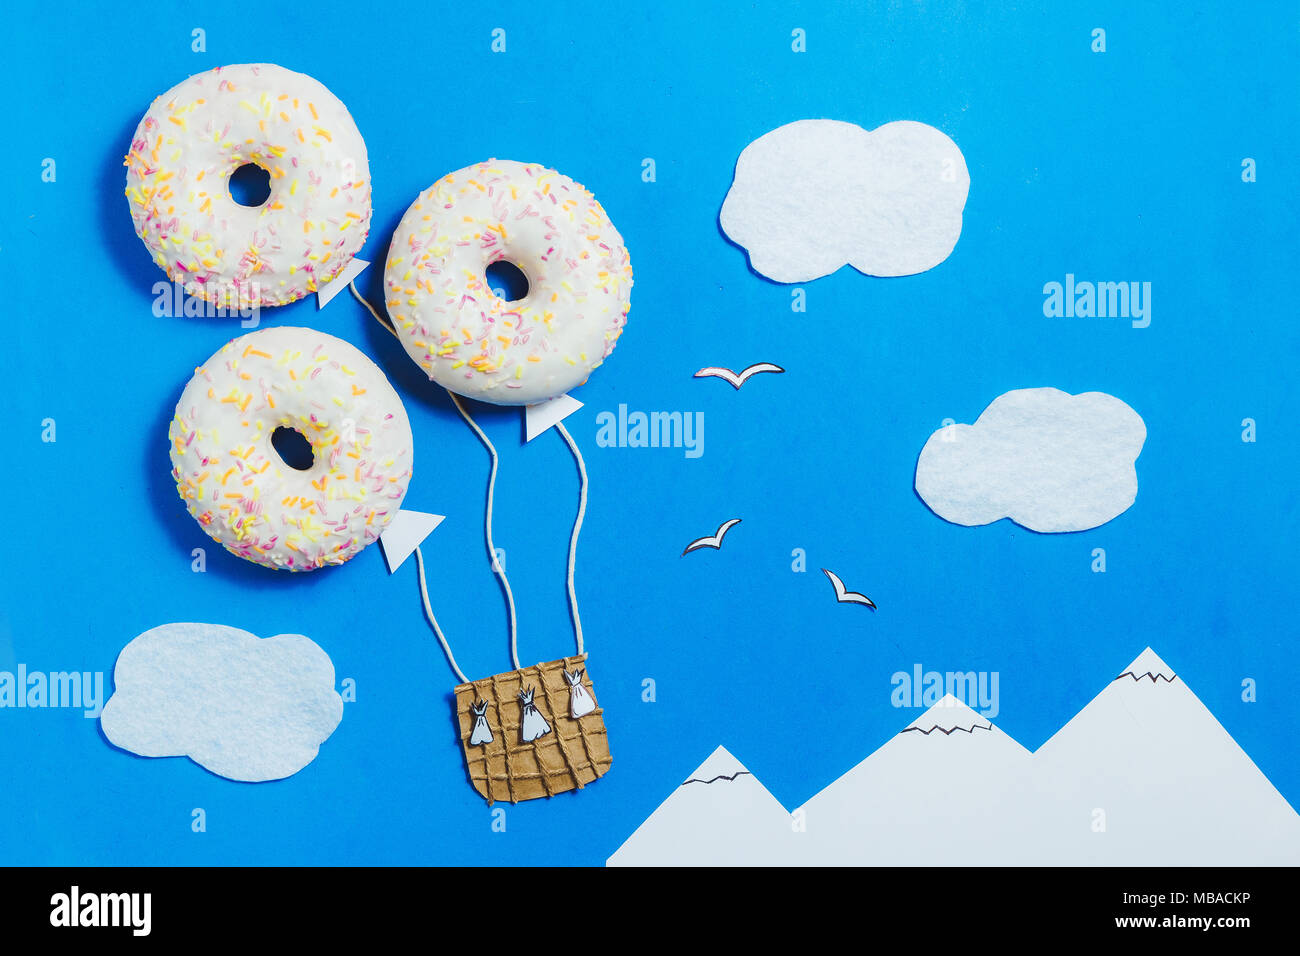 Creative Food Minimalism, Donut in Shape of Aerostat in Blue Sky with Clouds, Mountains, Top View, Copy Space, Travel Stock Photo